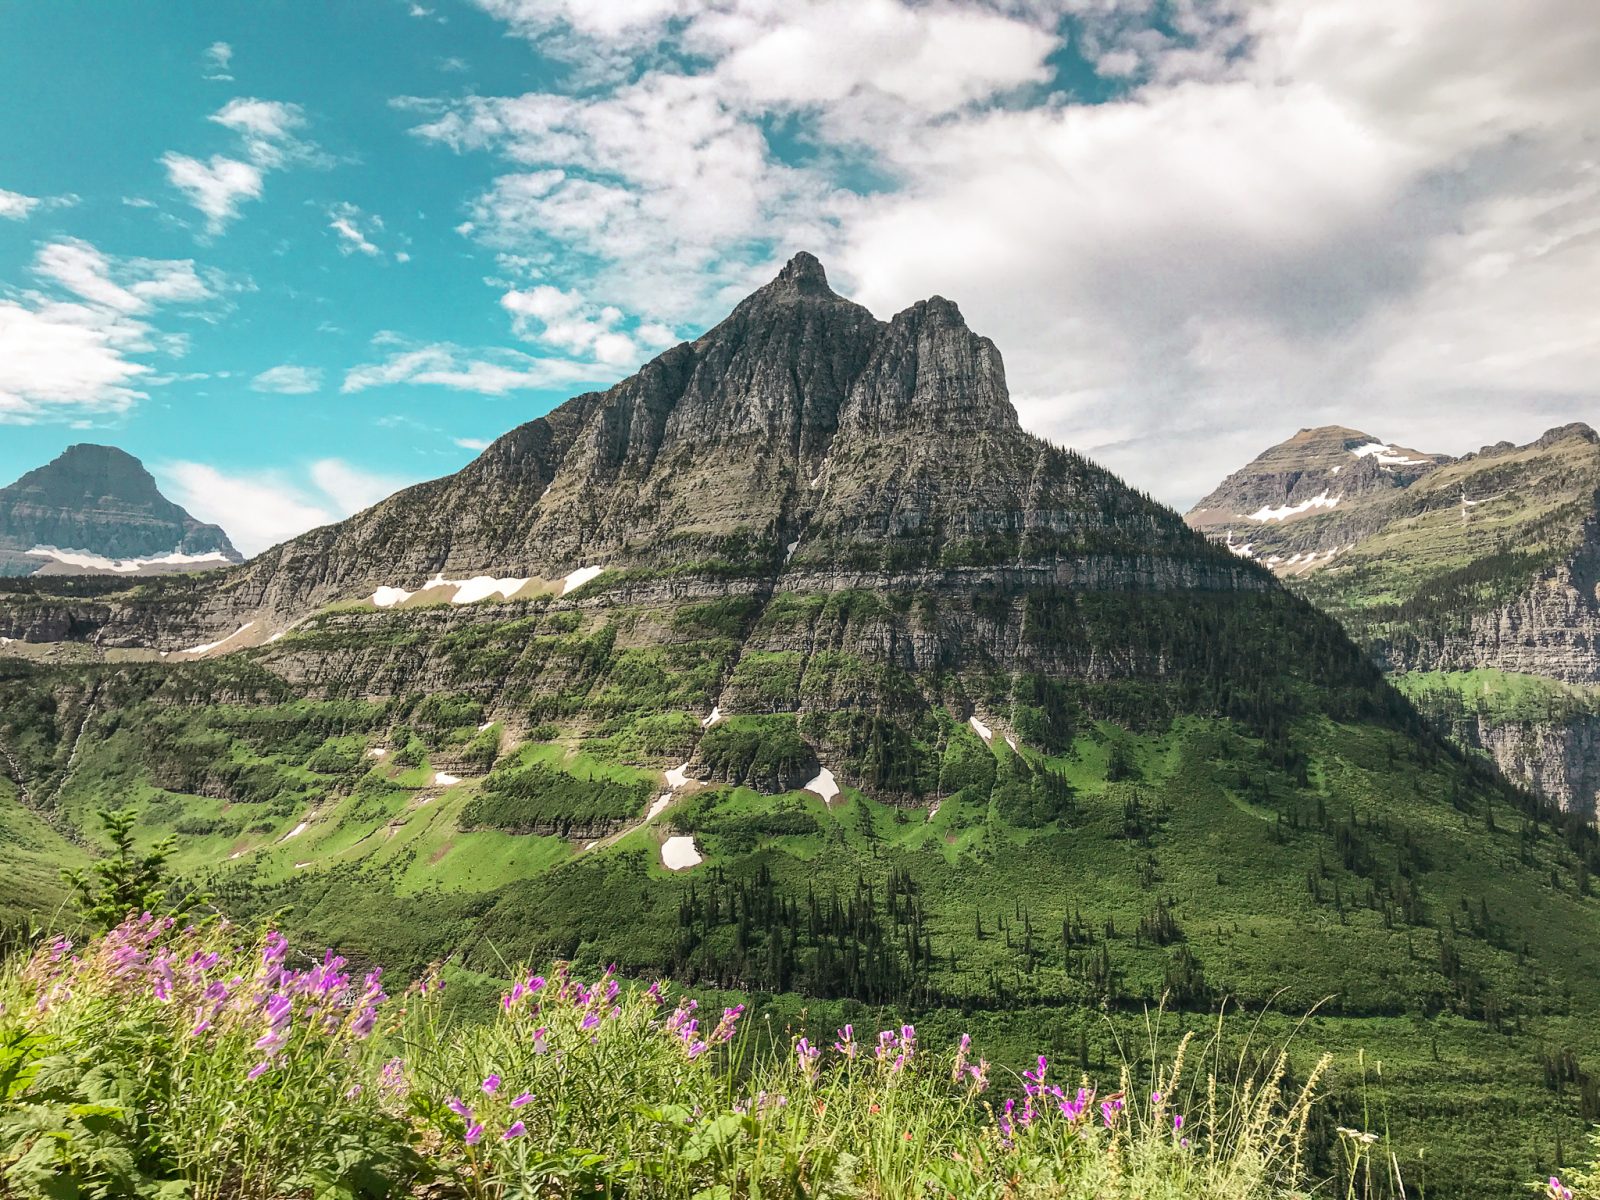 road trip from florida to glacier national park